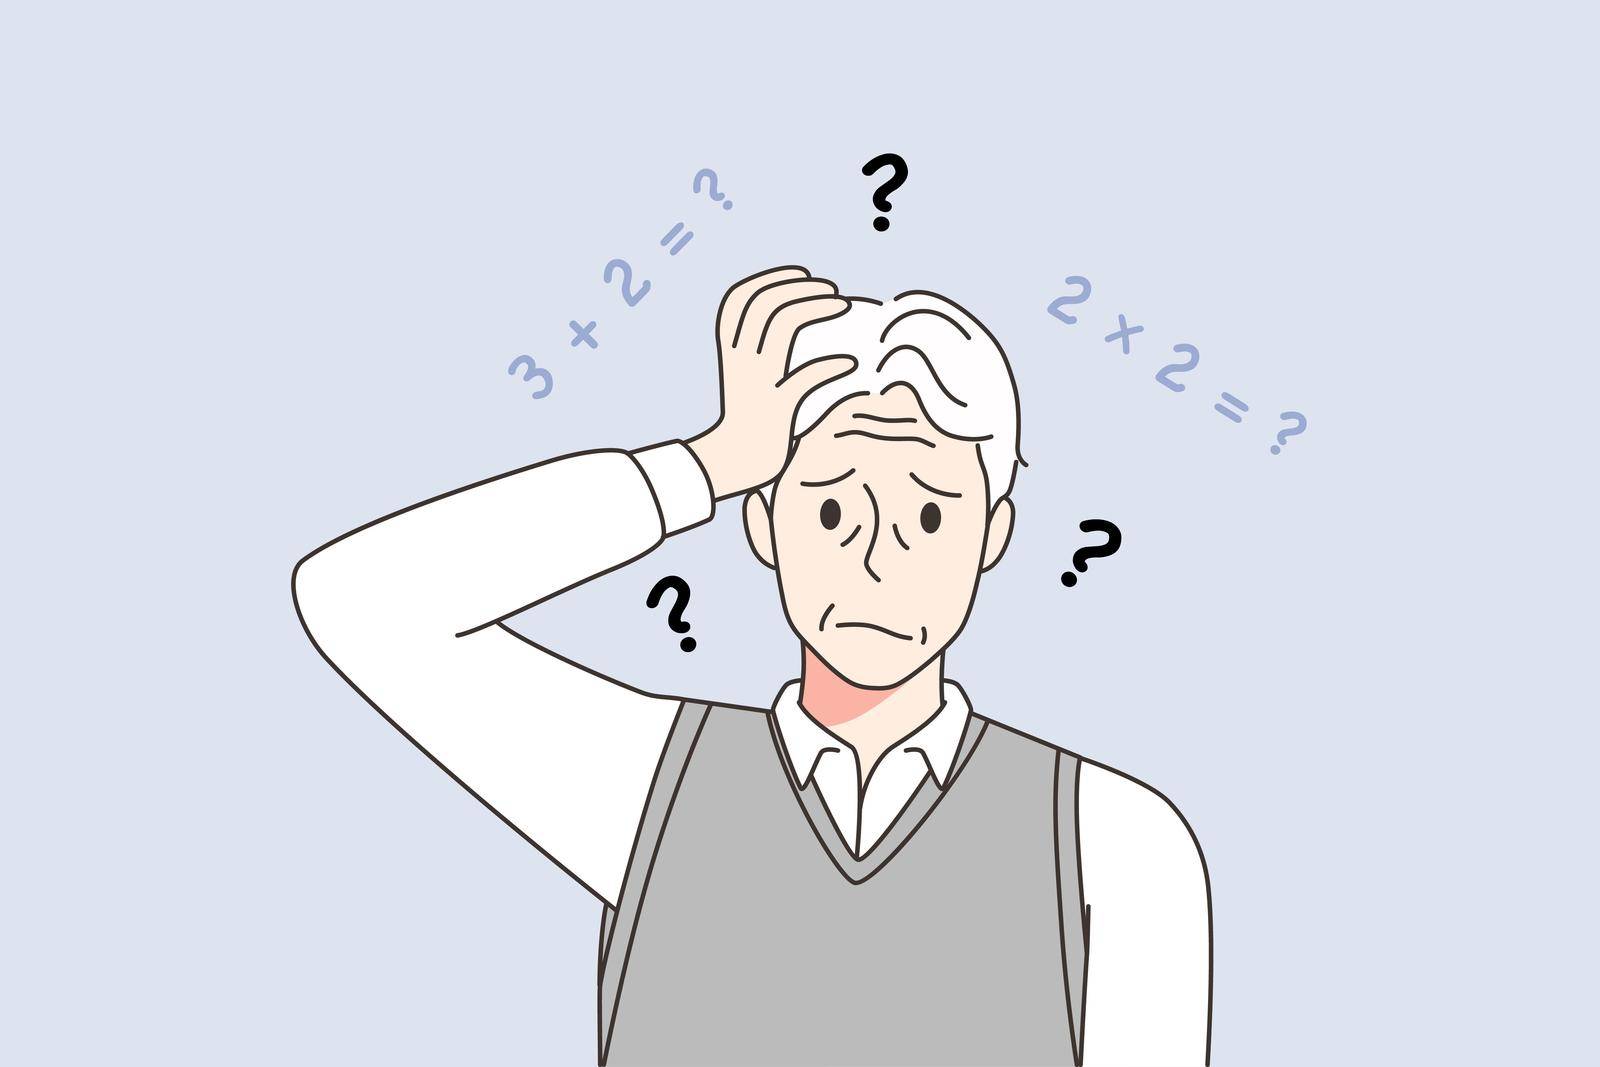 Unhappy elderly man lose memory suffer from dementia or Alzheimer disease. Concept of old people health problems. Healthcare and geriatrics. Vector illustration.